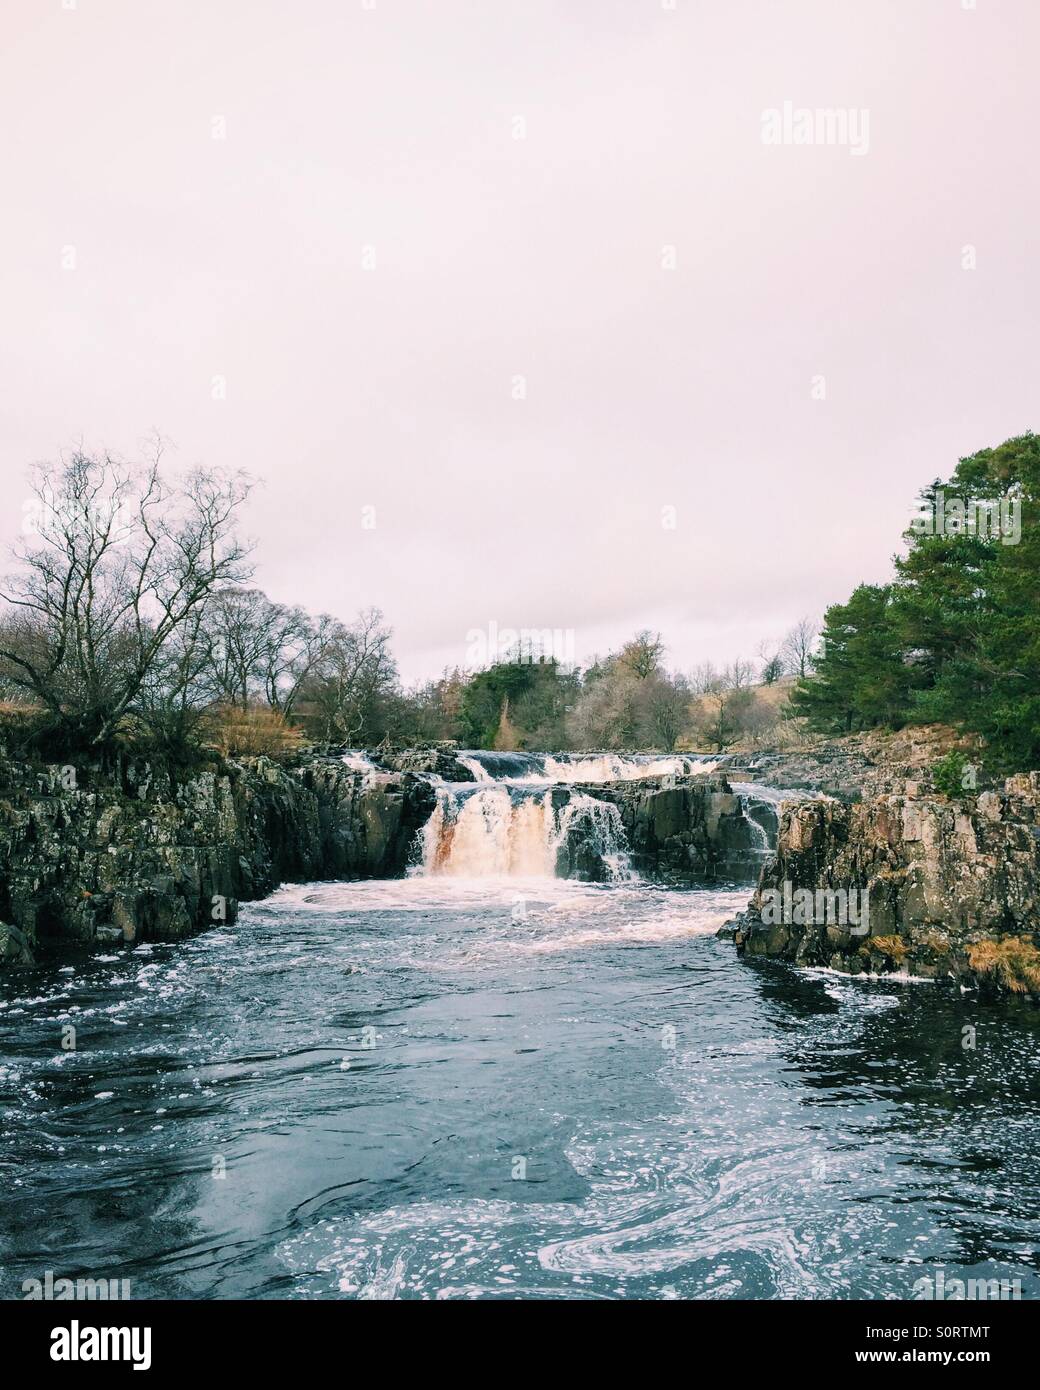 The River Tees at the Low Force waterfall in Teesdale, England, during winter. Stock Photo